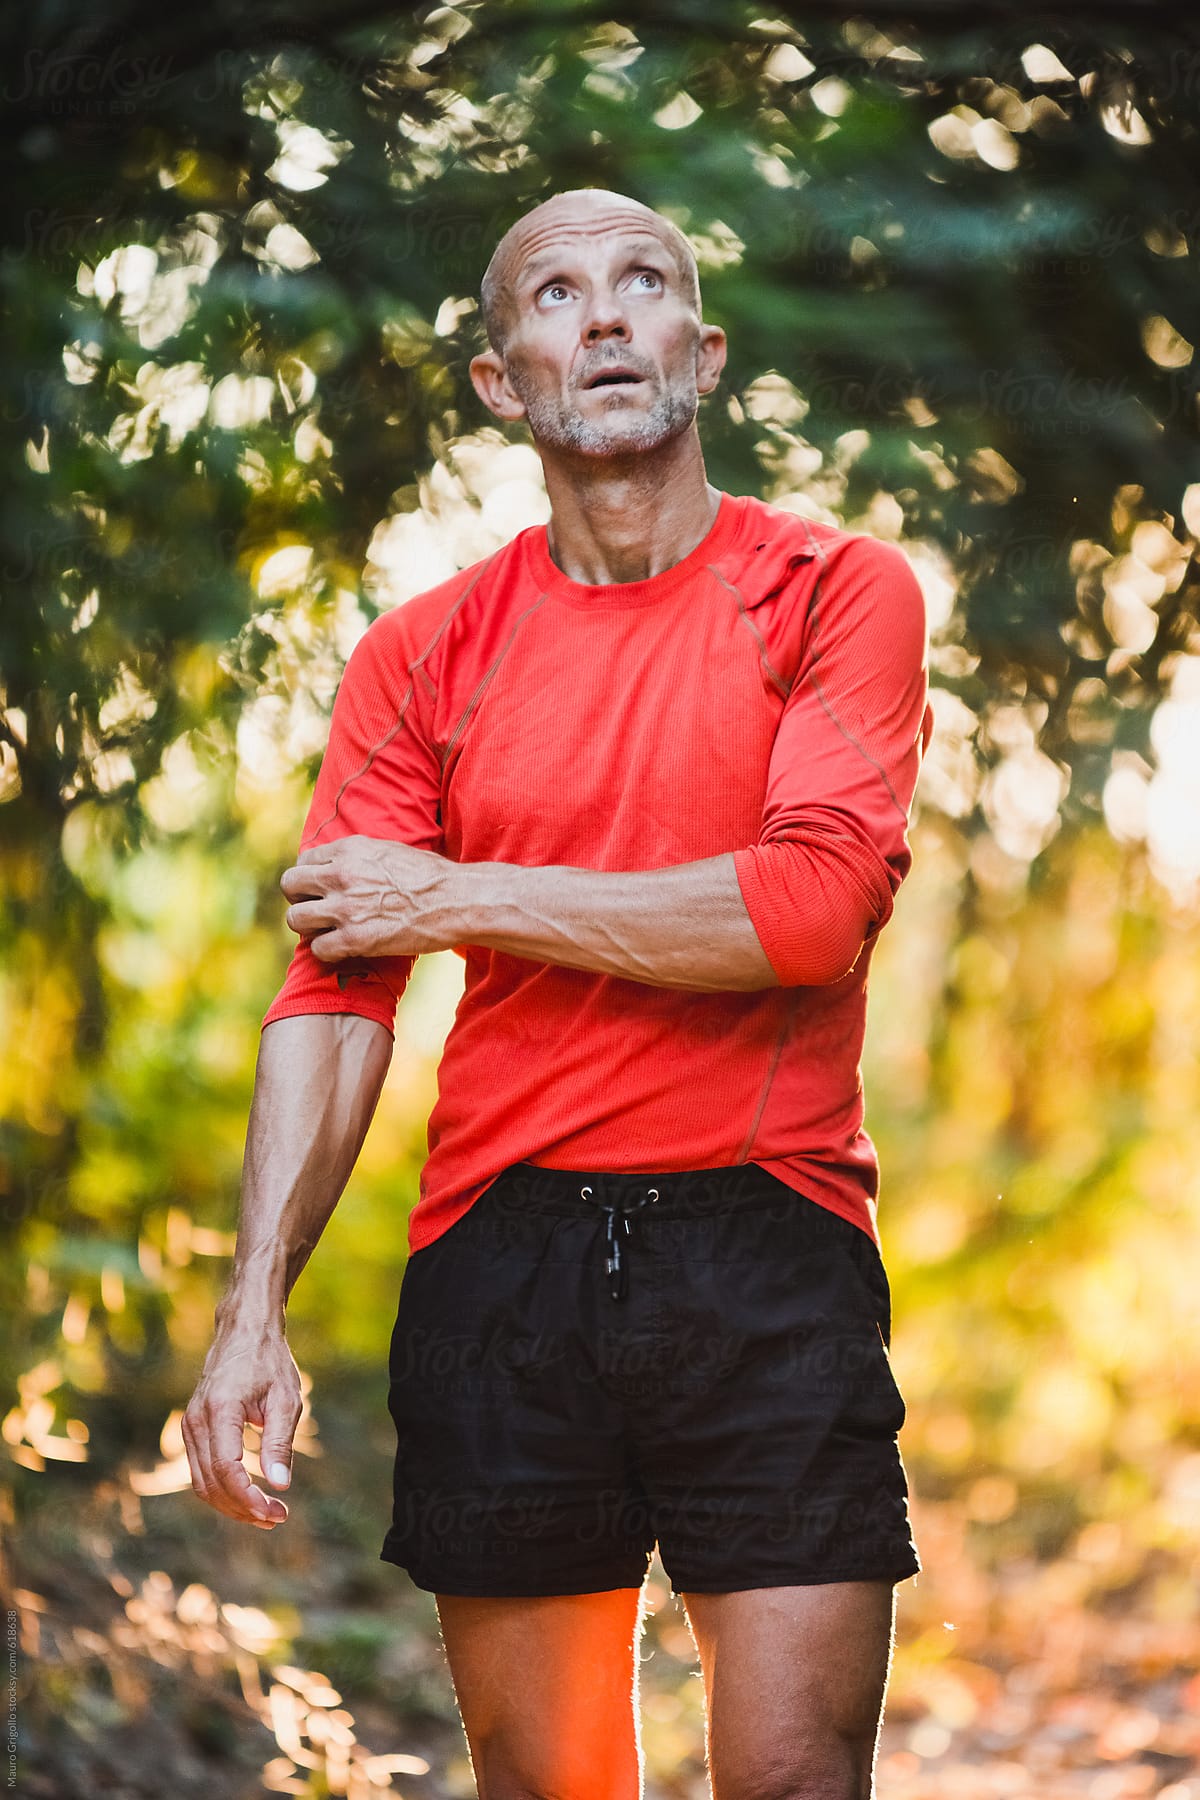 Man getting ready for a workout in nature